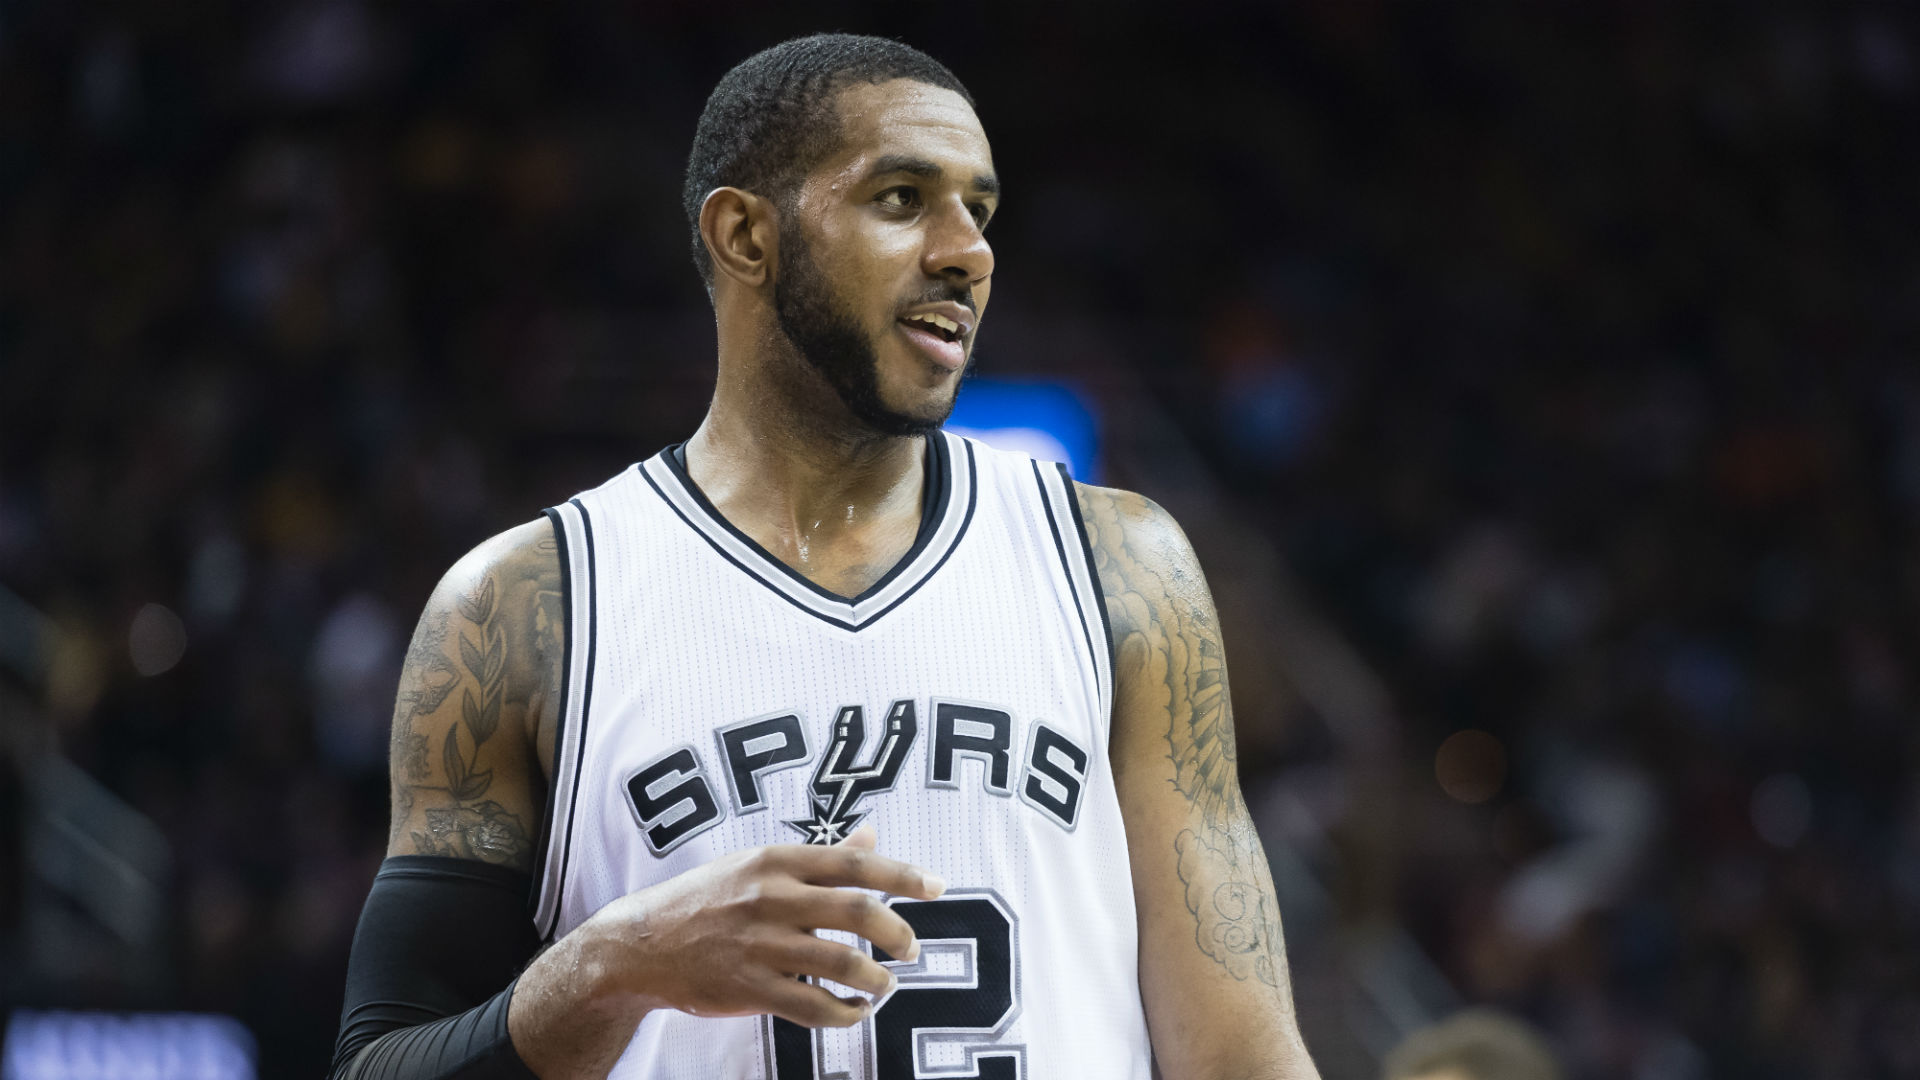 The San Antonio Spurs made it seven wins in a row on Friday as six of their players reached double-digit points.